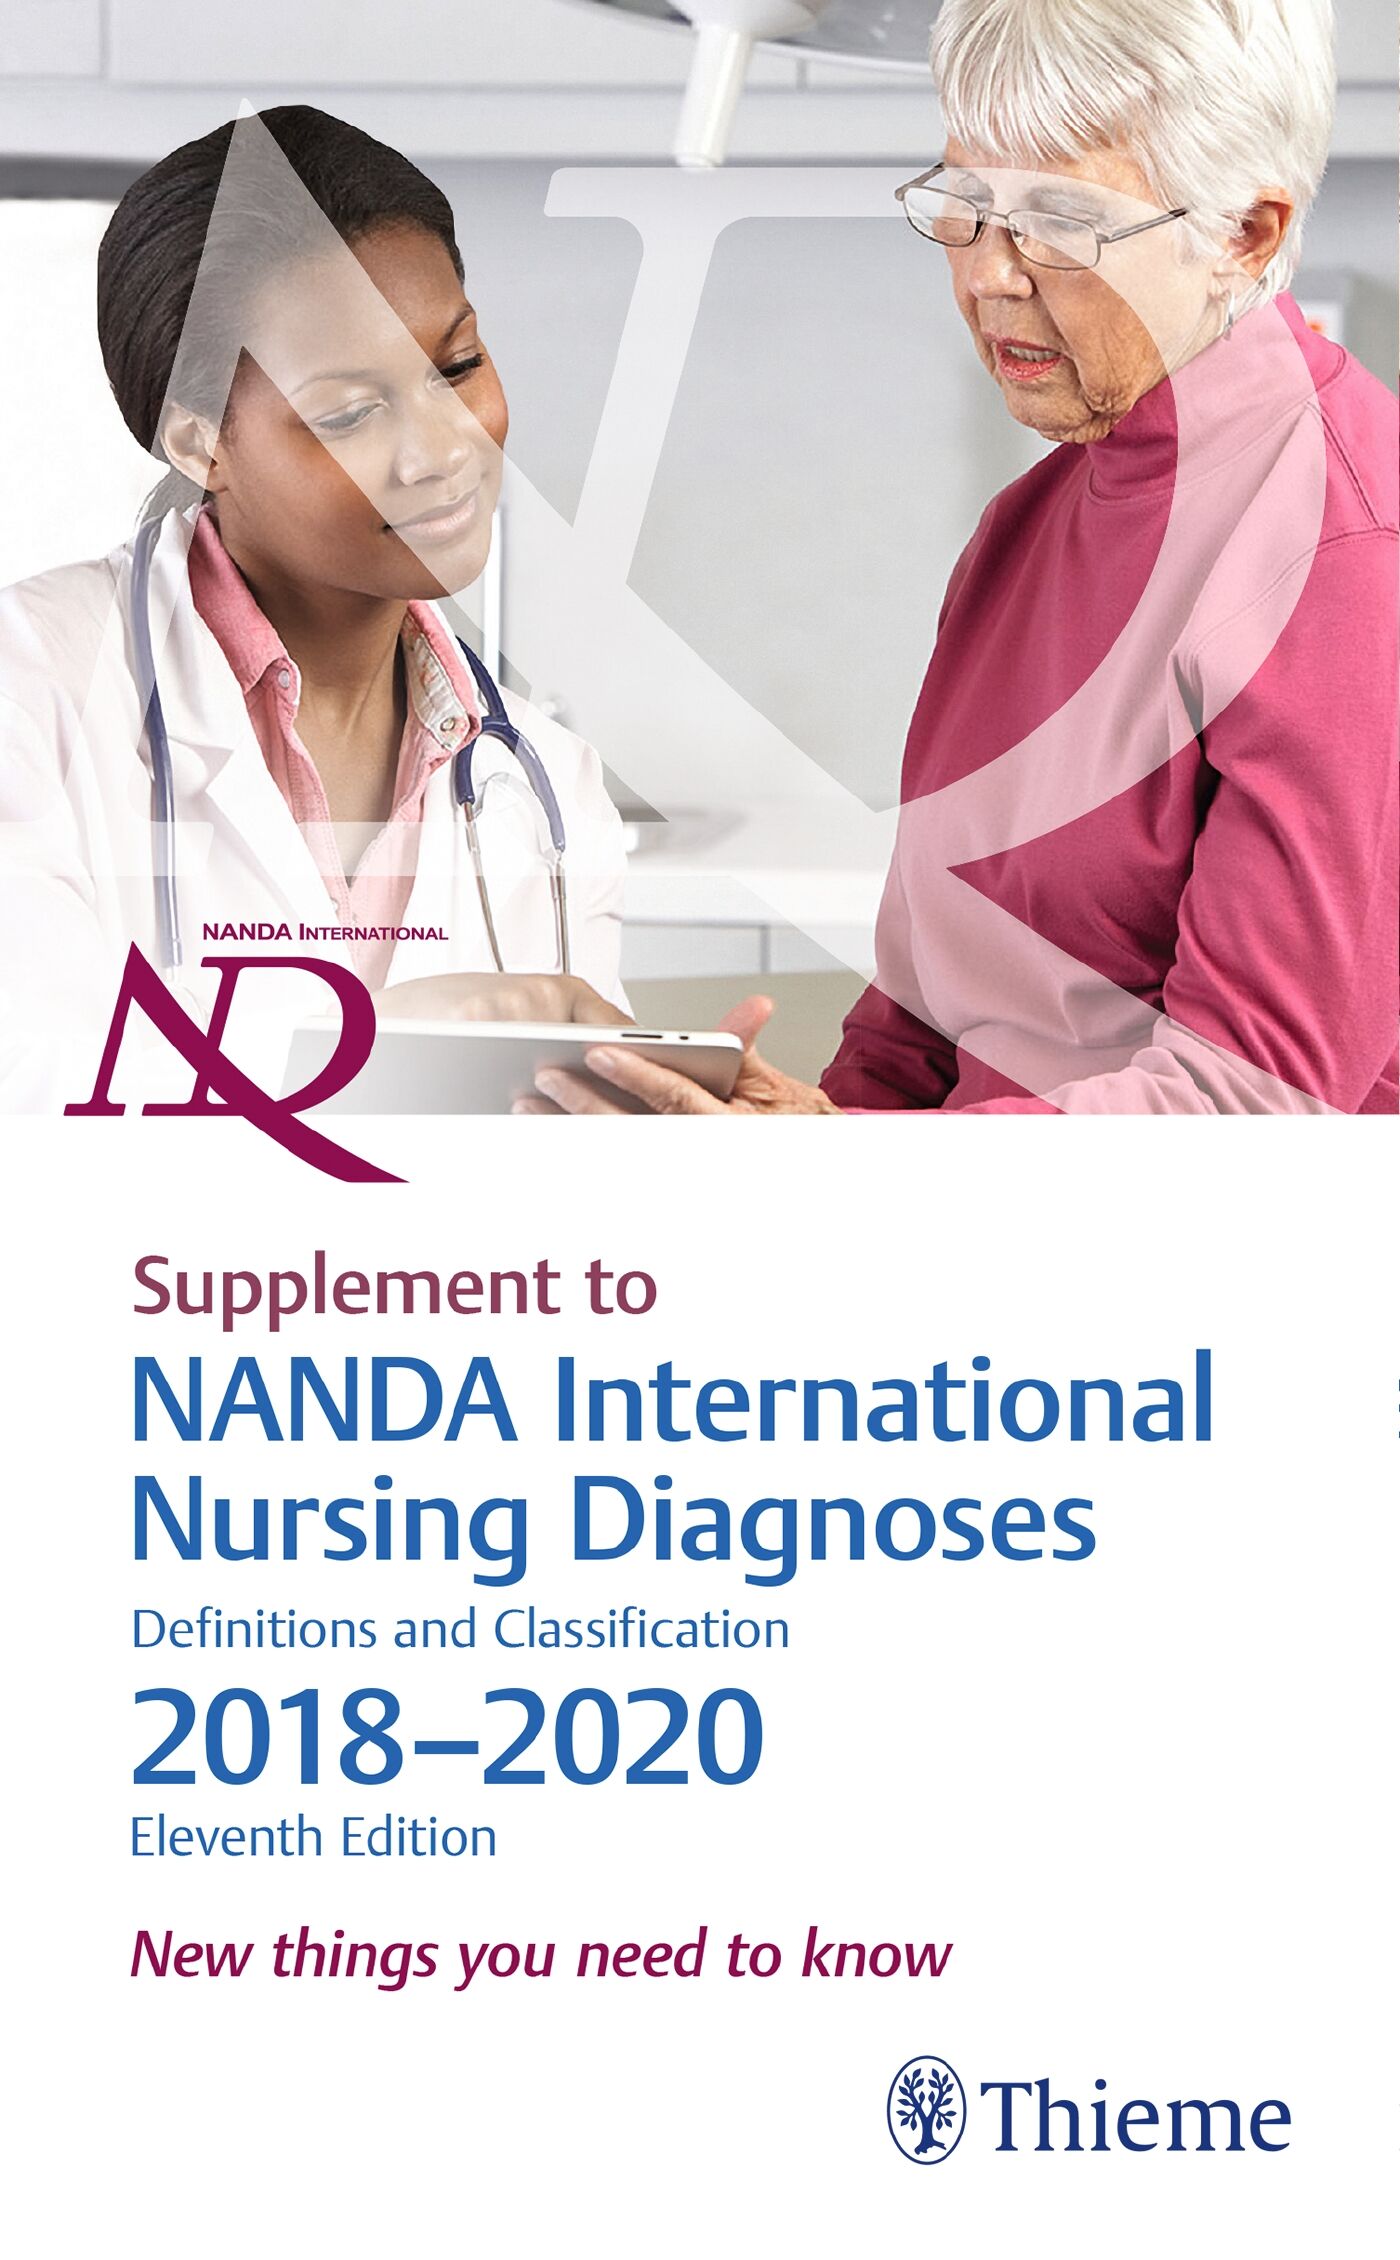 Supplement to NANDA International Nursing Diagnoses: Definitions and Classification, 2018–2020 (11th Edition), 9781684202058